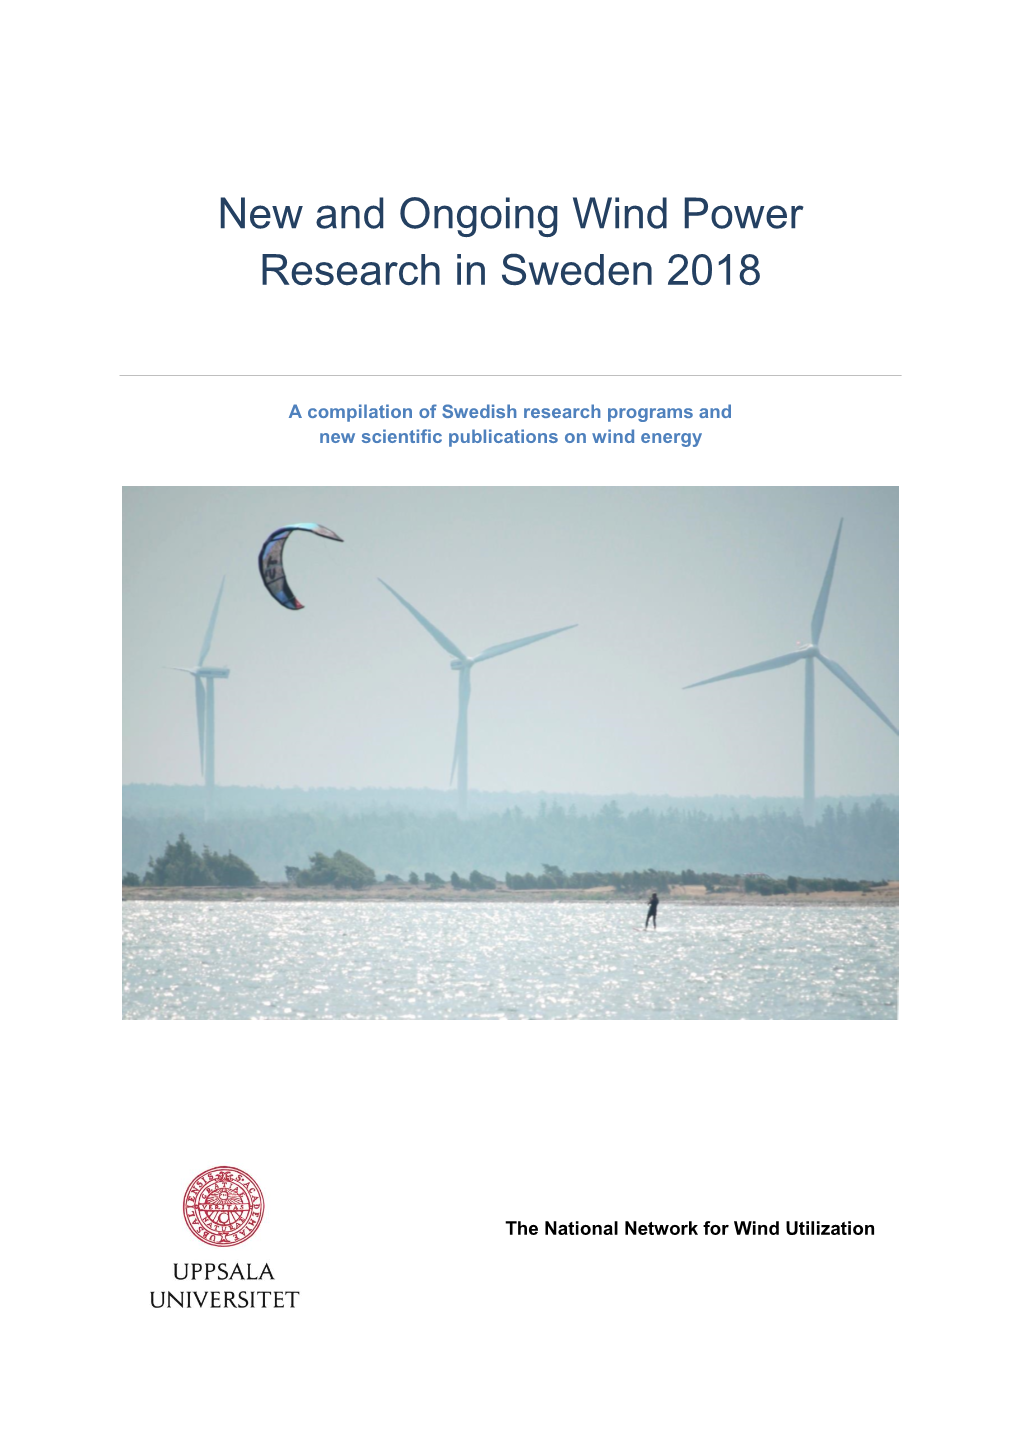 New and Ongoing Wind Power Research in Sweden 2018